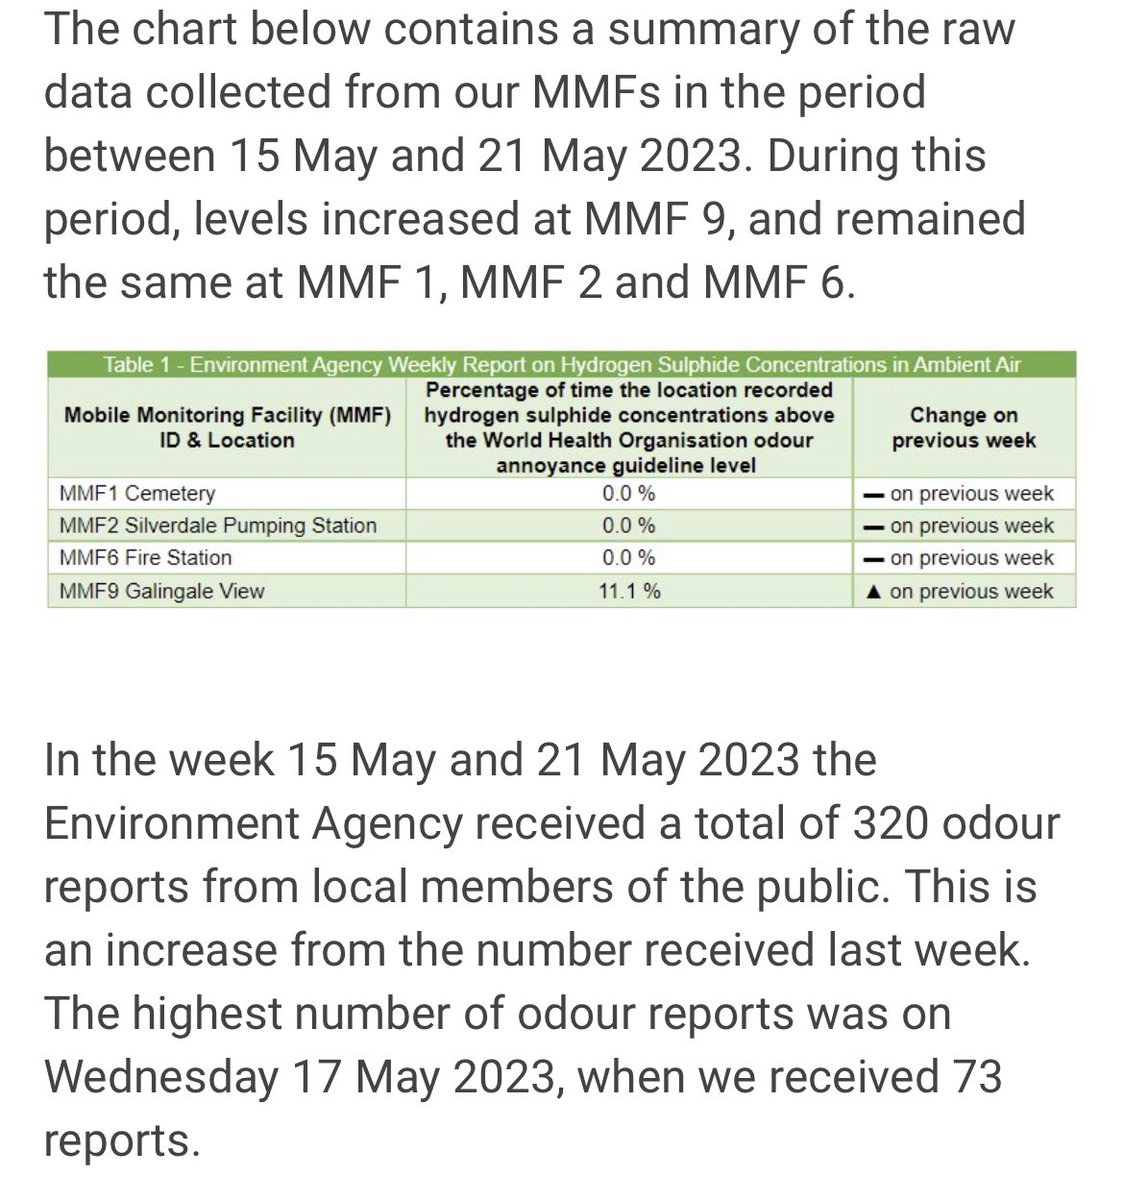 Newcastle under Lyme is choking on @RedIndustries2 Walleys landfill @EnvAgency why are the MMF’s readings zero except for Gallingale?You received 320 toxic reports last week 🤔 stop taking us for fools @SimonTagg @AaronBell4NUL @NewsNBC @theresecoffey #stopthestink @BBCPanorama